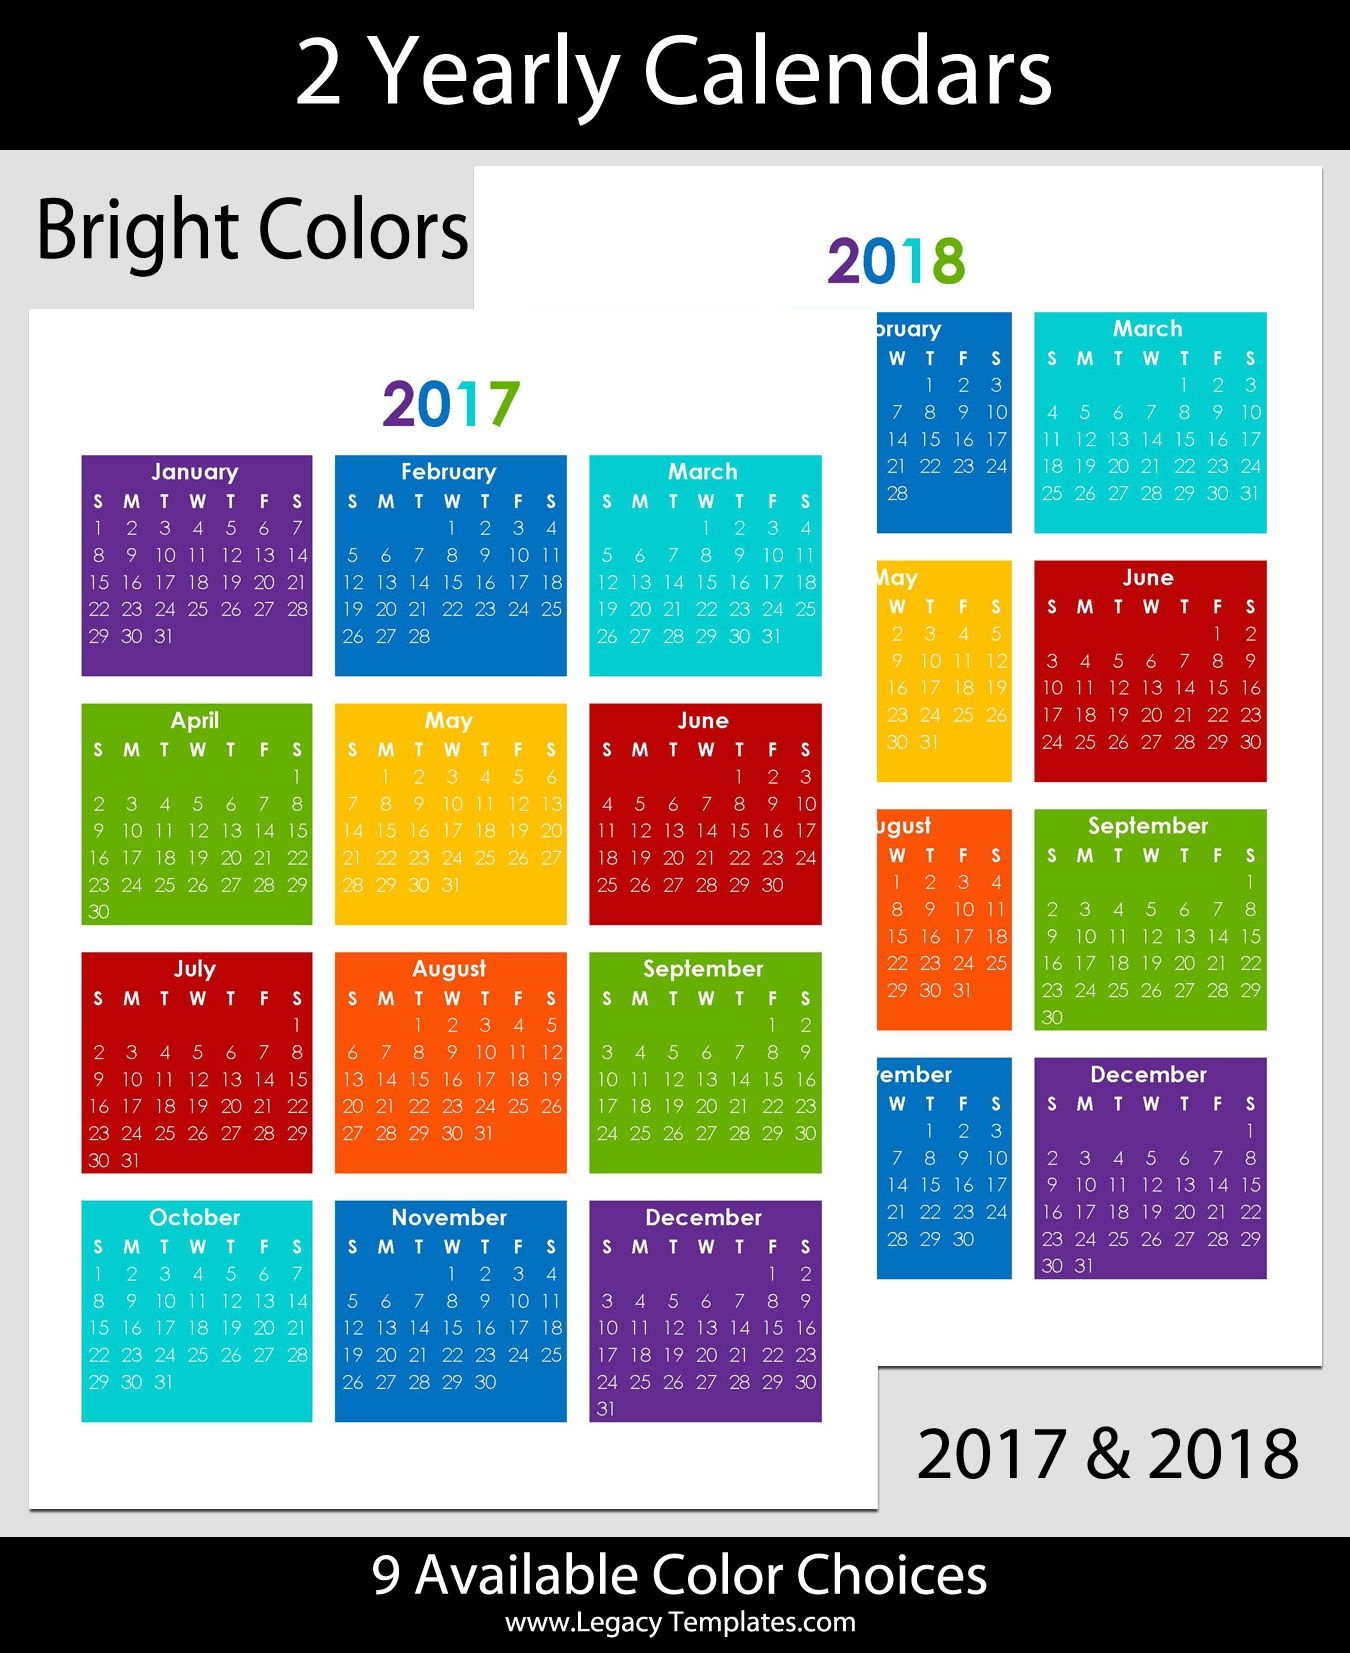 2017 & 2018 Yearly Calendar A4 | Legacy Templates